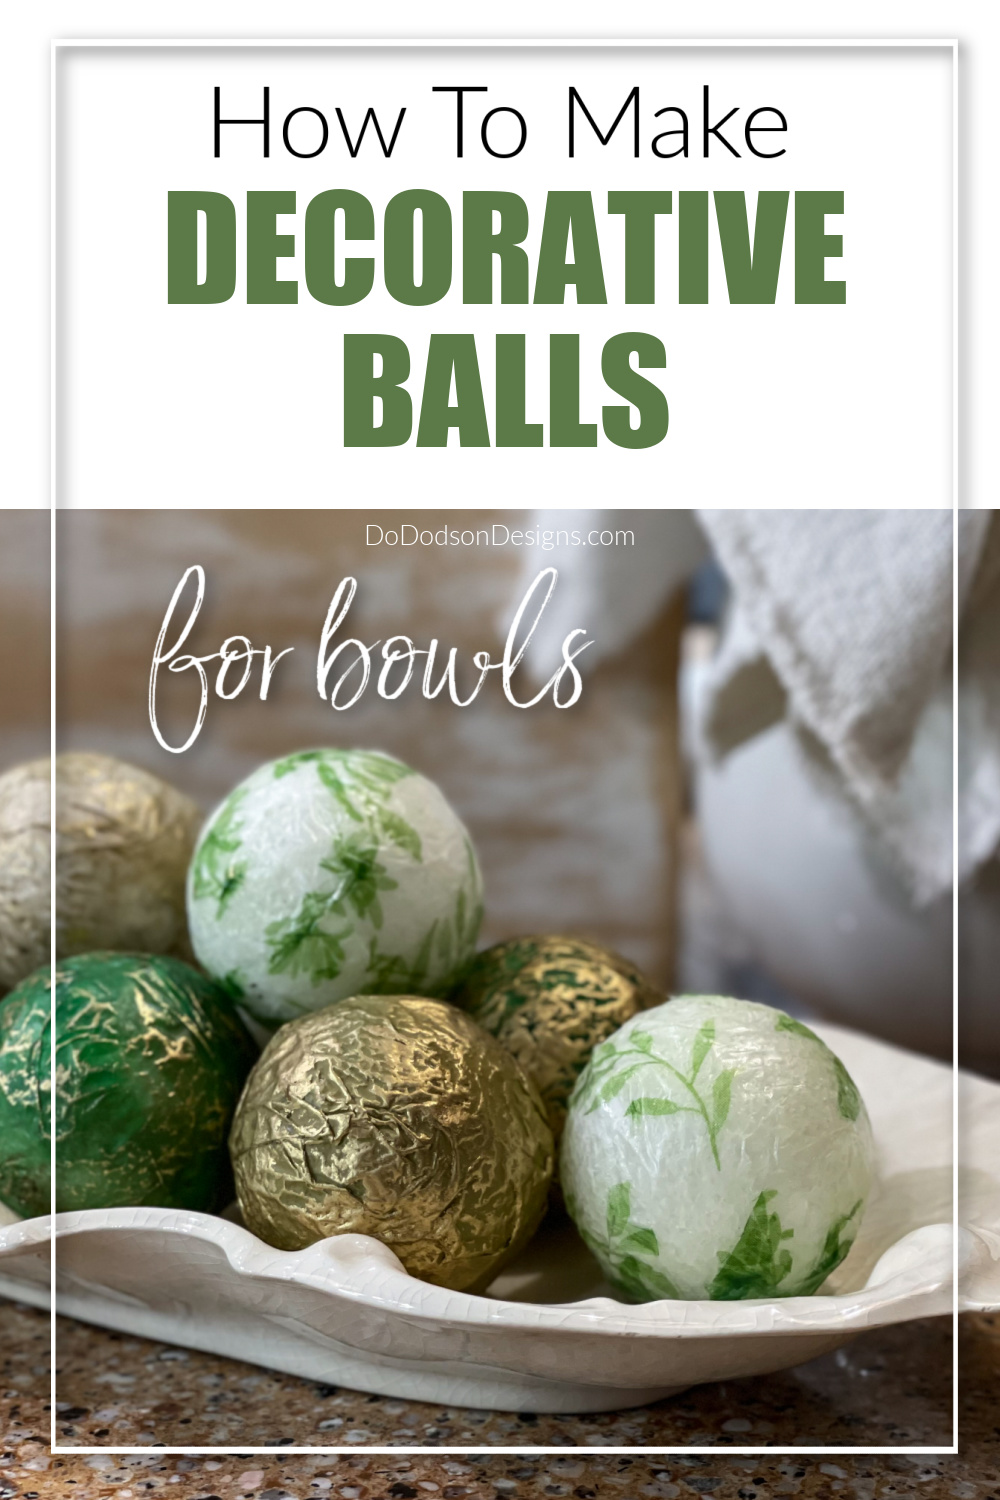 How To Make Decorative Balls (Easy, Fun, and Cheap!)